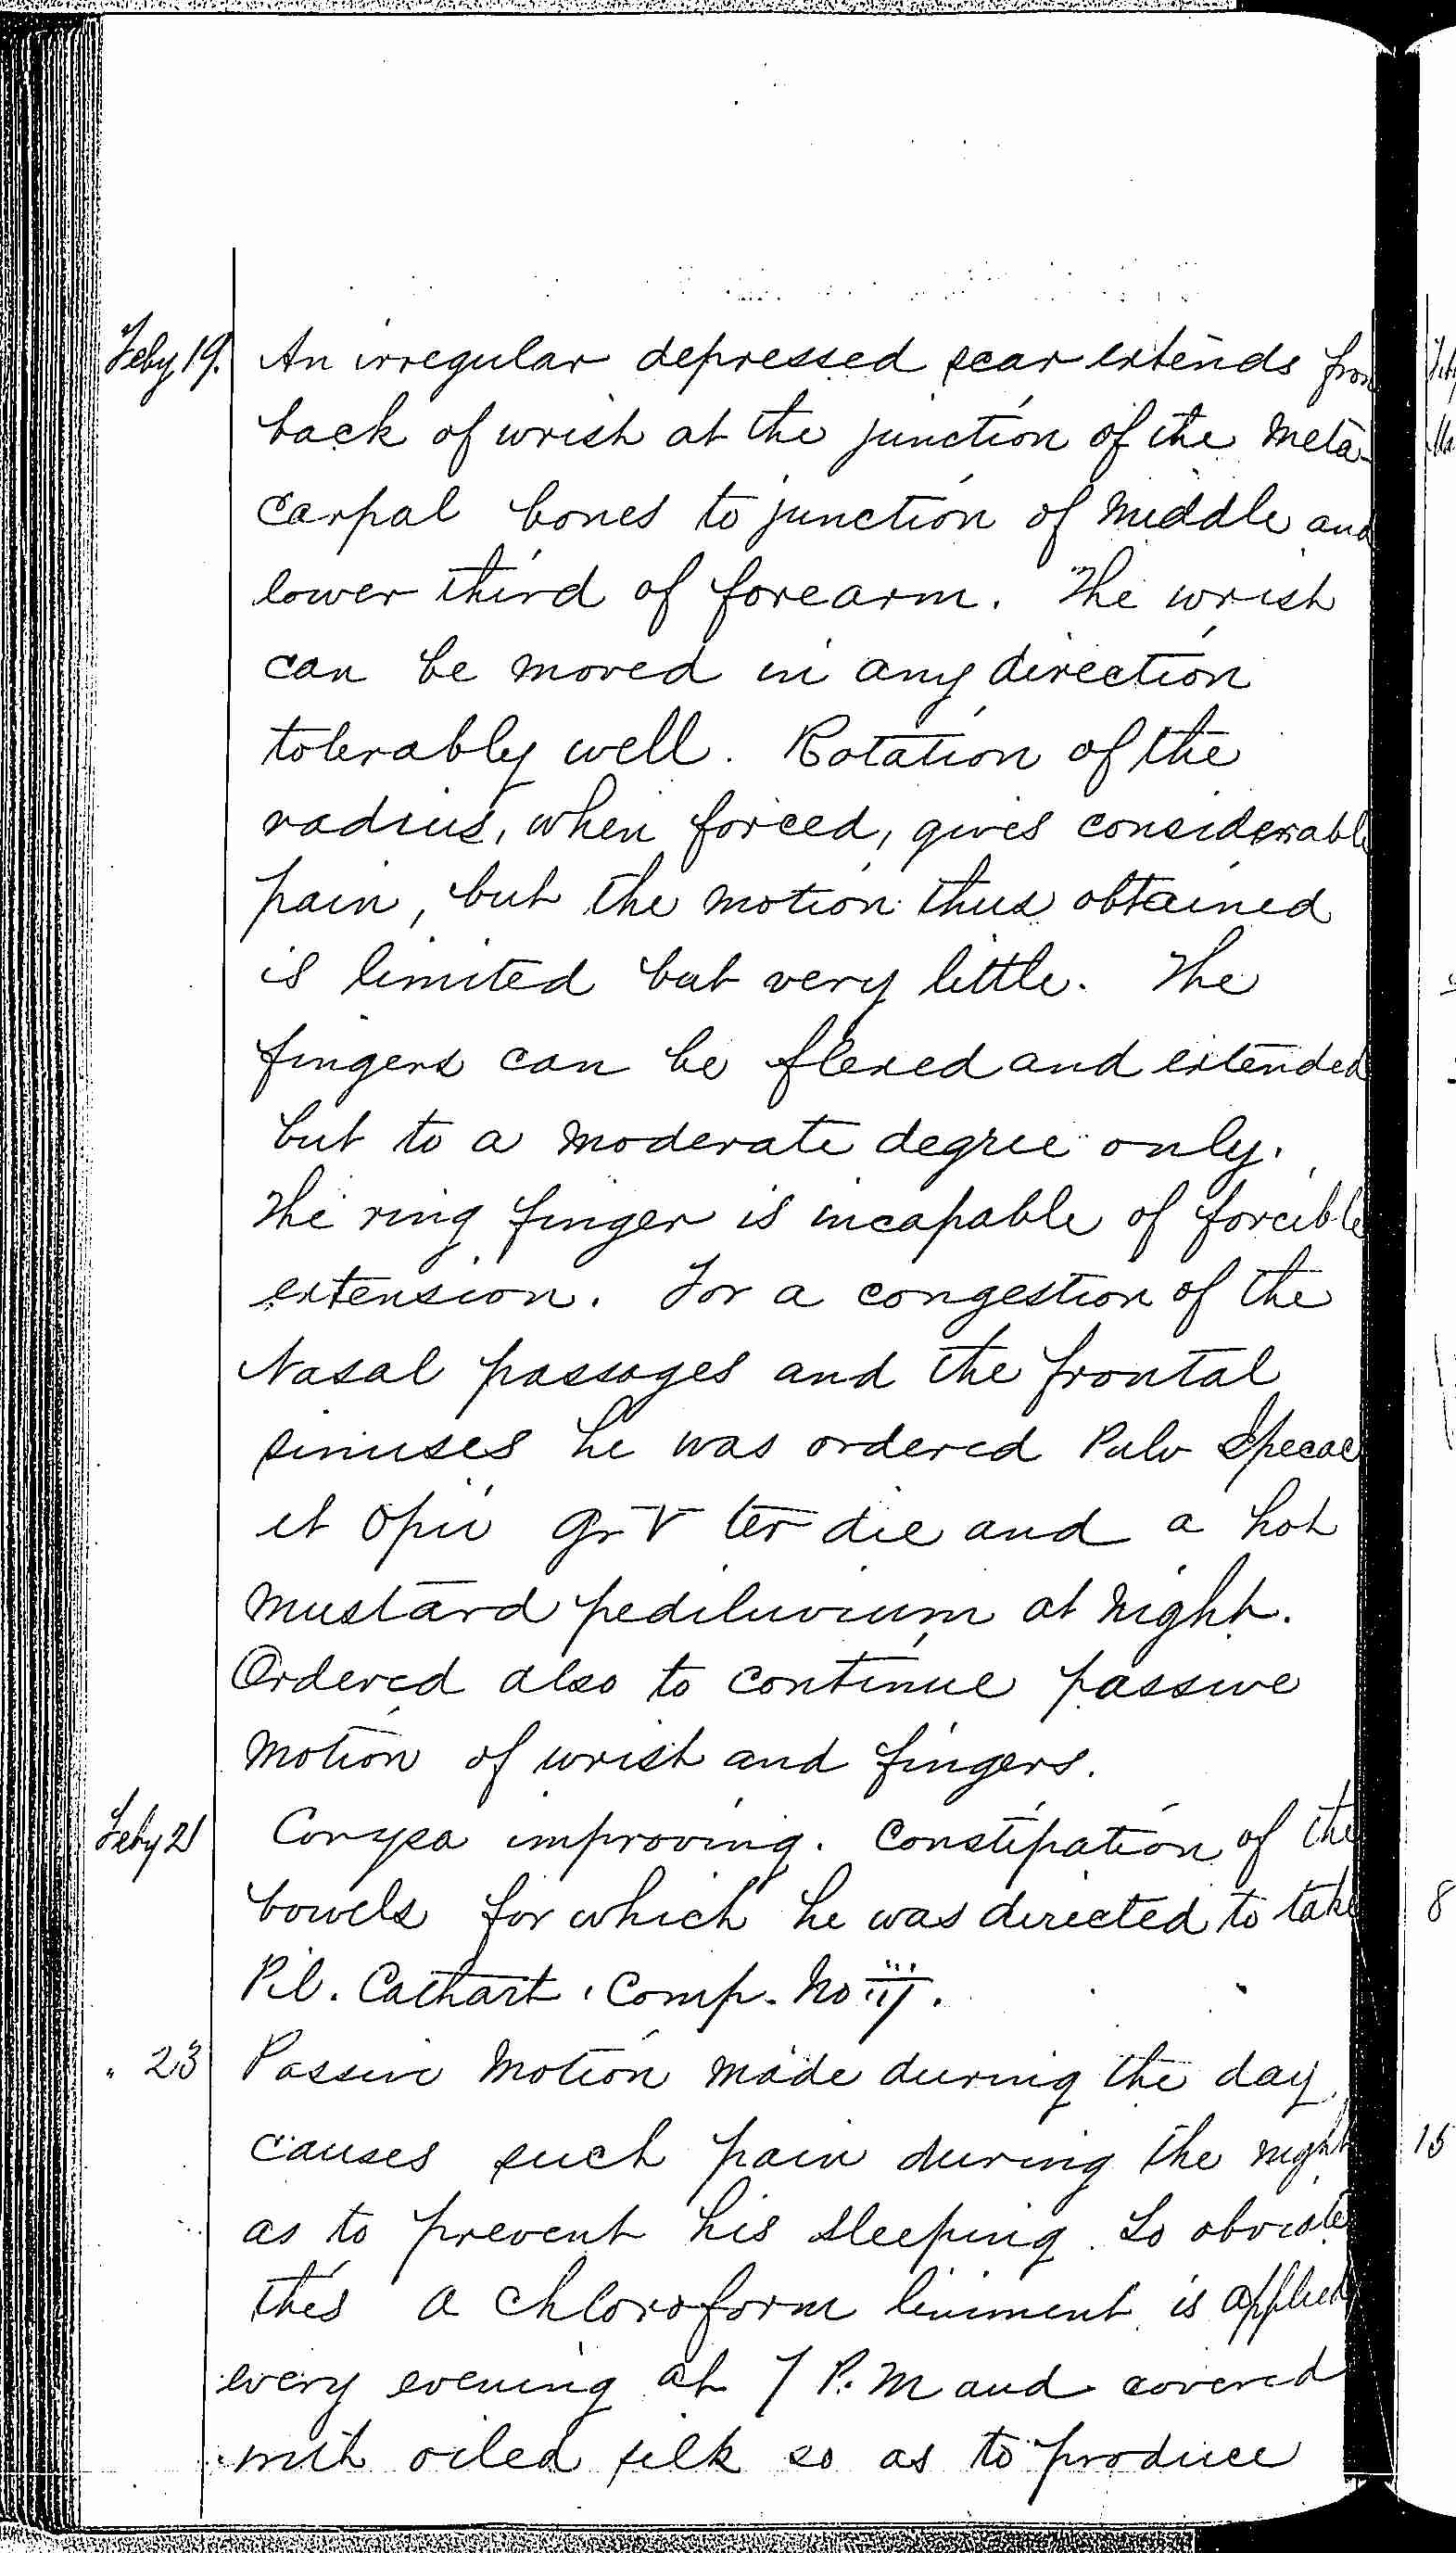 Entry for James Lockrey (page 2 of 5) in the log Hospital Tickets and Case Papers - Naval Hospital - Washington, D.C. - 1868-69